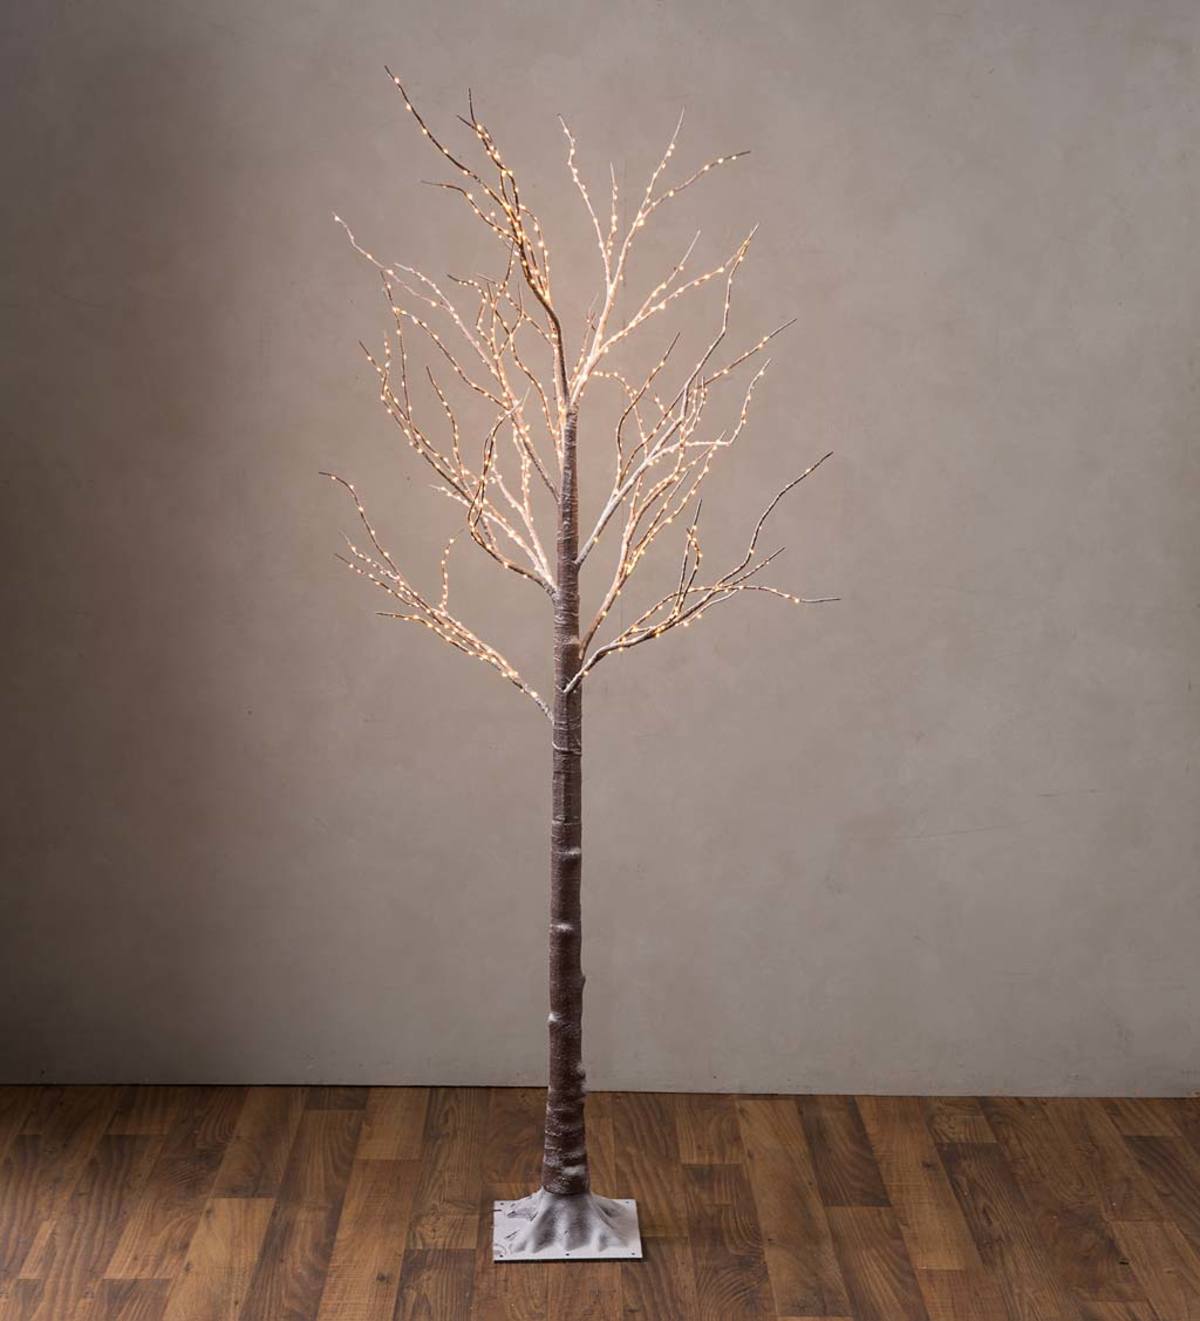 Indoor/Outdoor Battery-Operated Lighted Ceramic Christmas Tree